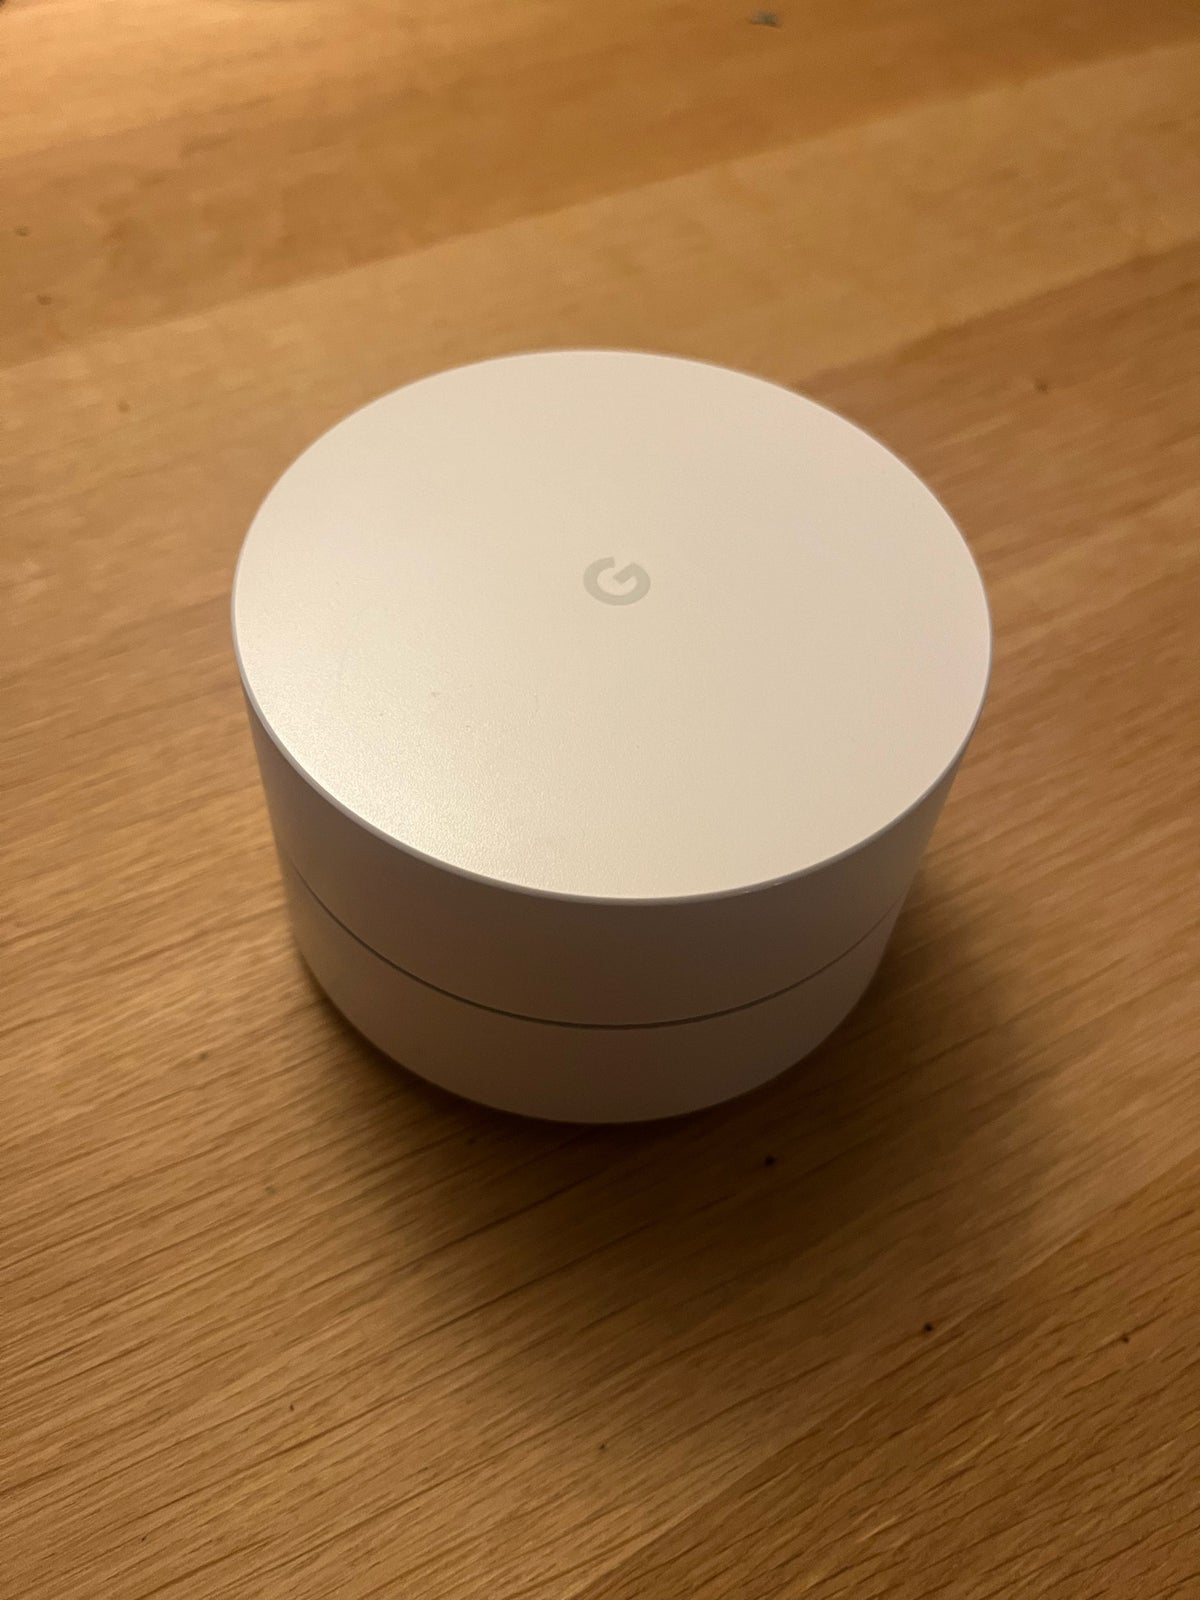 Router, wireless, Google Wifi Router